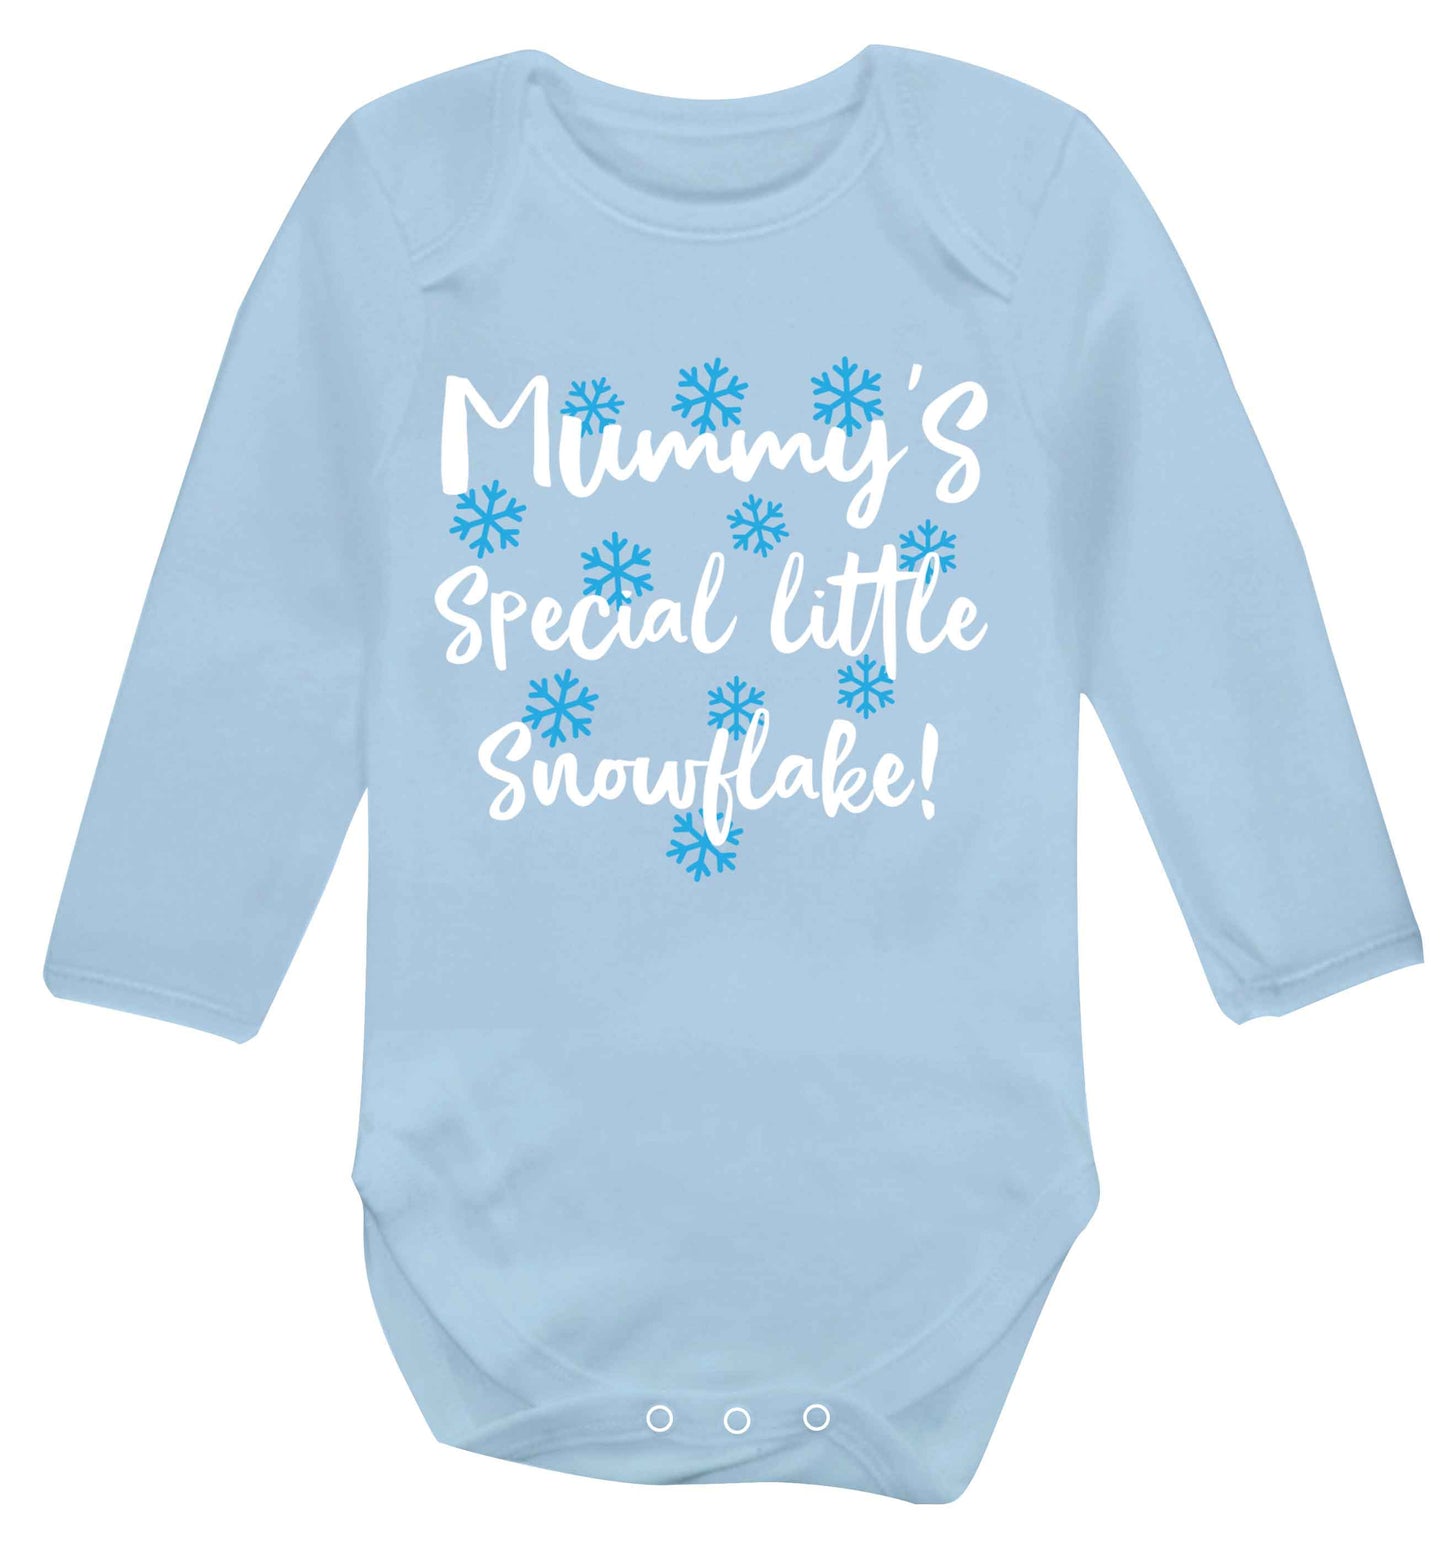 Mummy's special little snowflake Baby Vest long sleeved pale blue 6-12 months